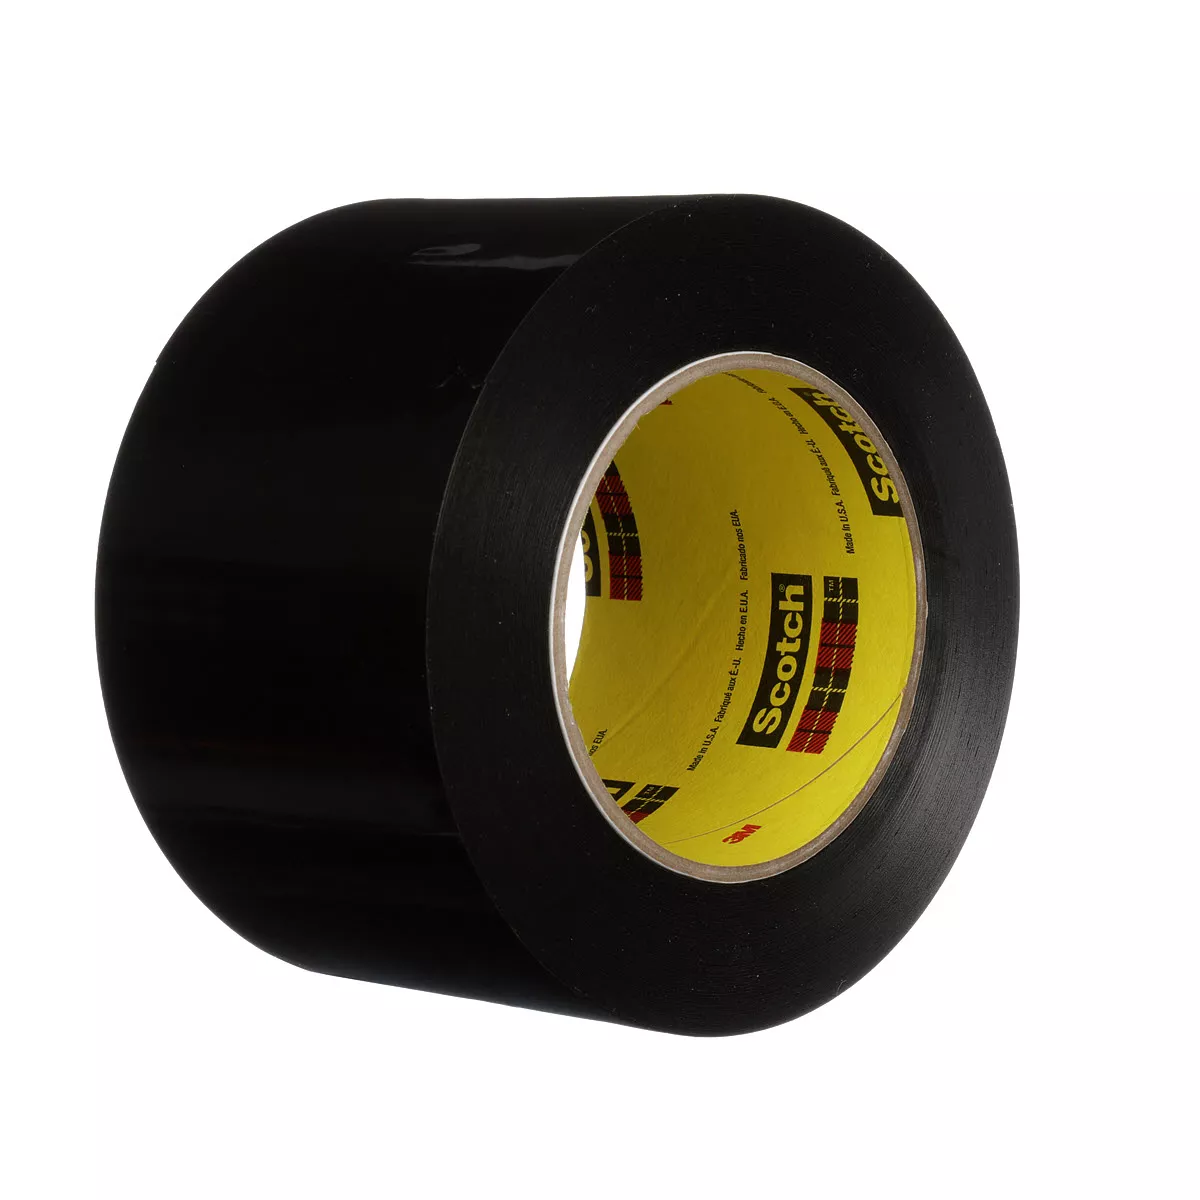 3M™ Preservation Sealing Tape 481, Black, 3 in x 36 yd, 9.5 mil, 12
Roll/Case